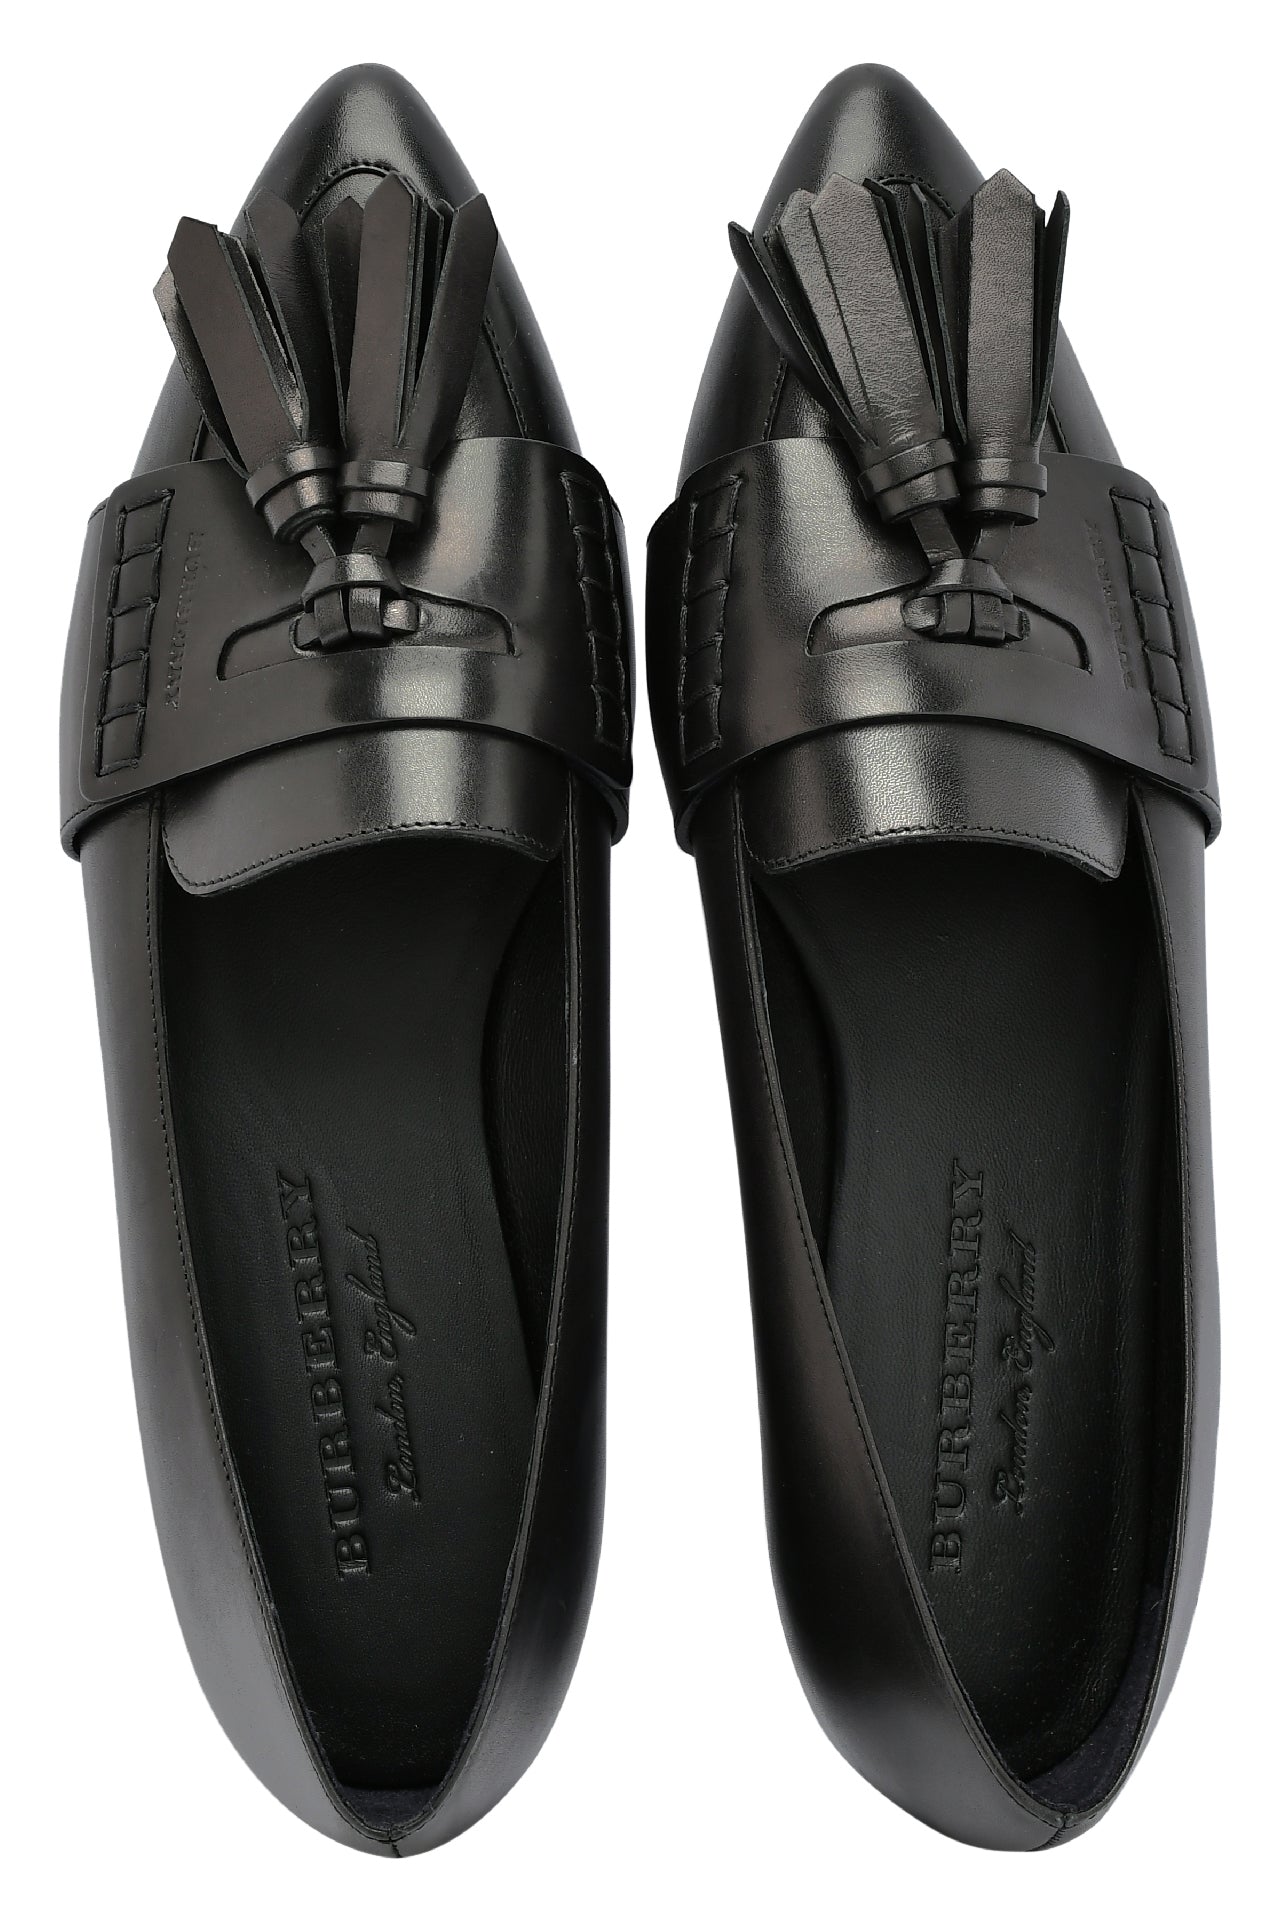 Burberry Black Leather Coledale Tassel Detail Pointed Toe Penny Loafers EU 39.5